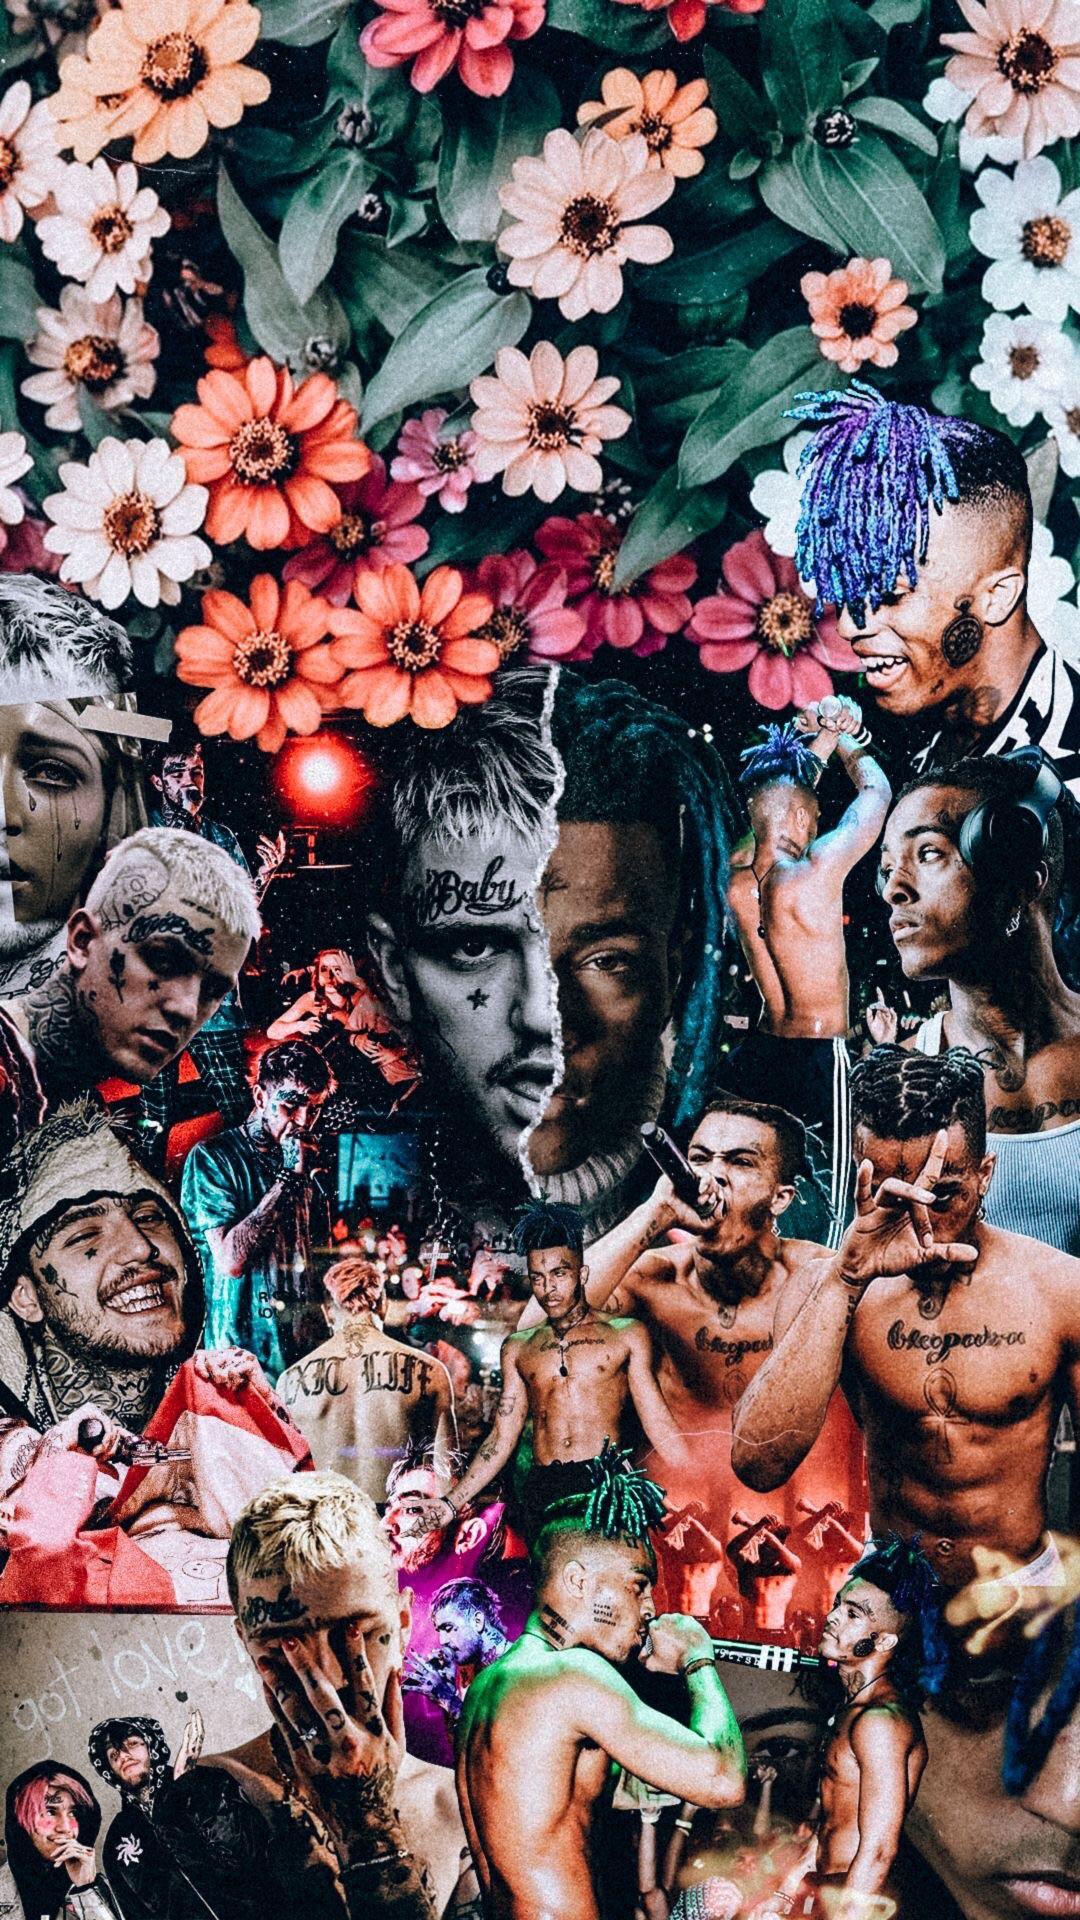 Lil peep and XXXTENTACION wallpapers I found I thought